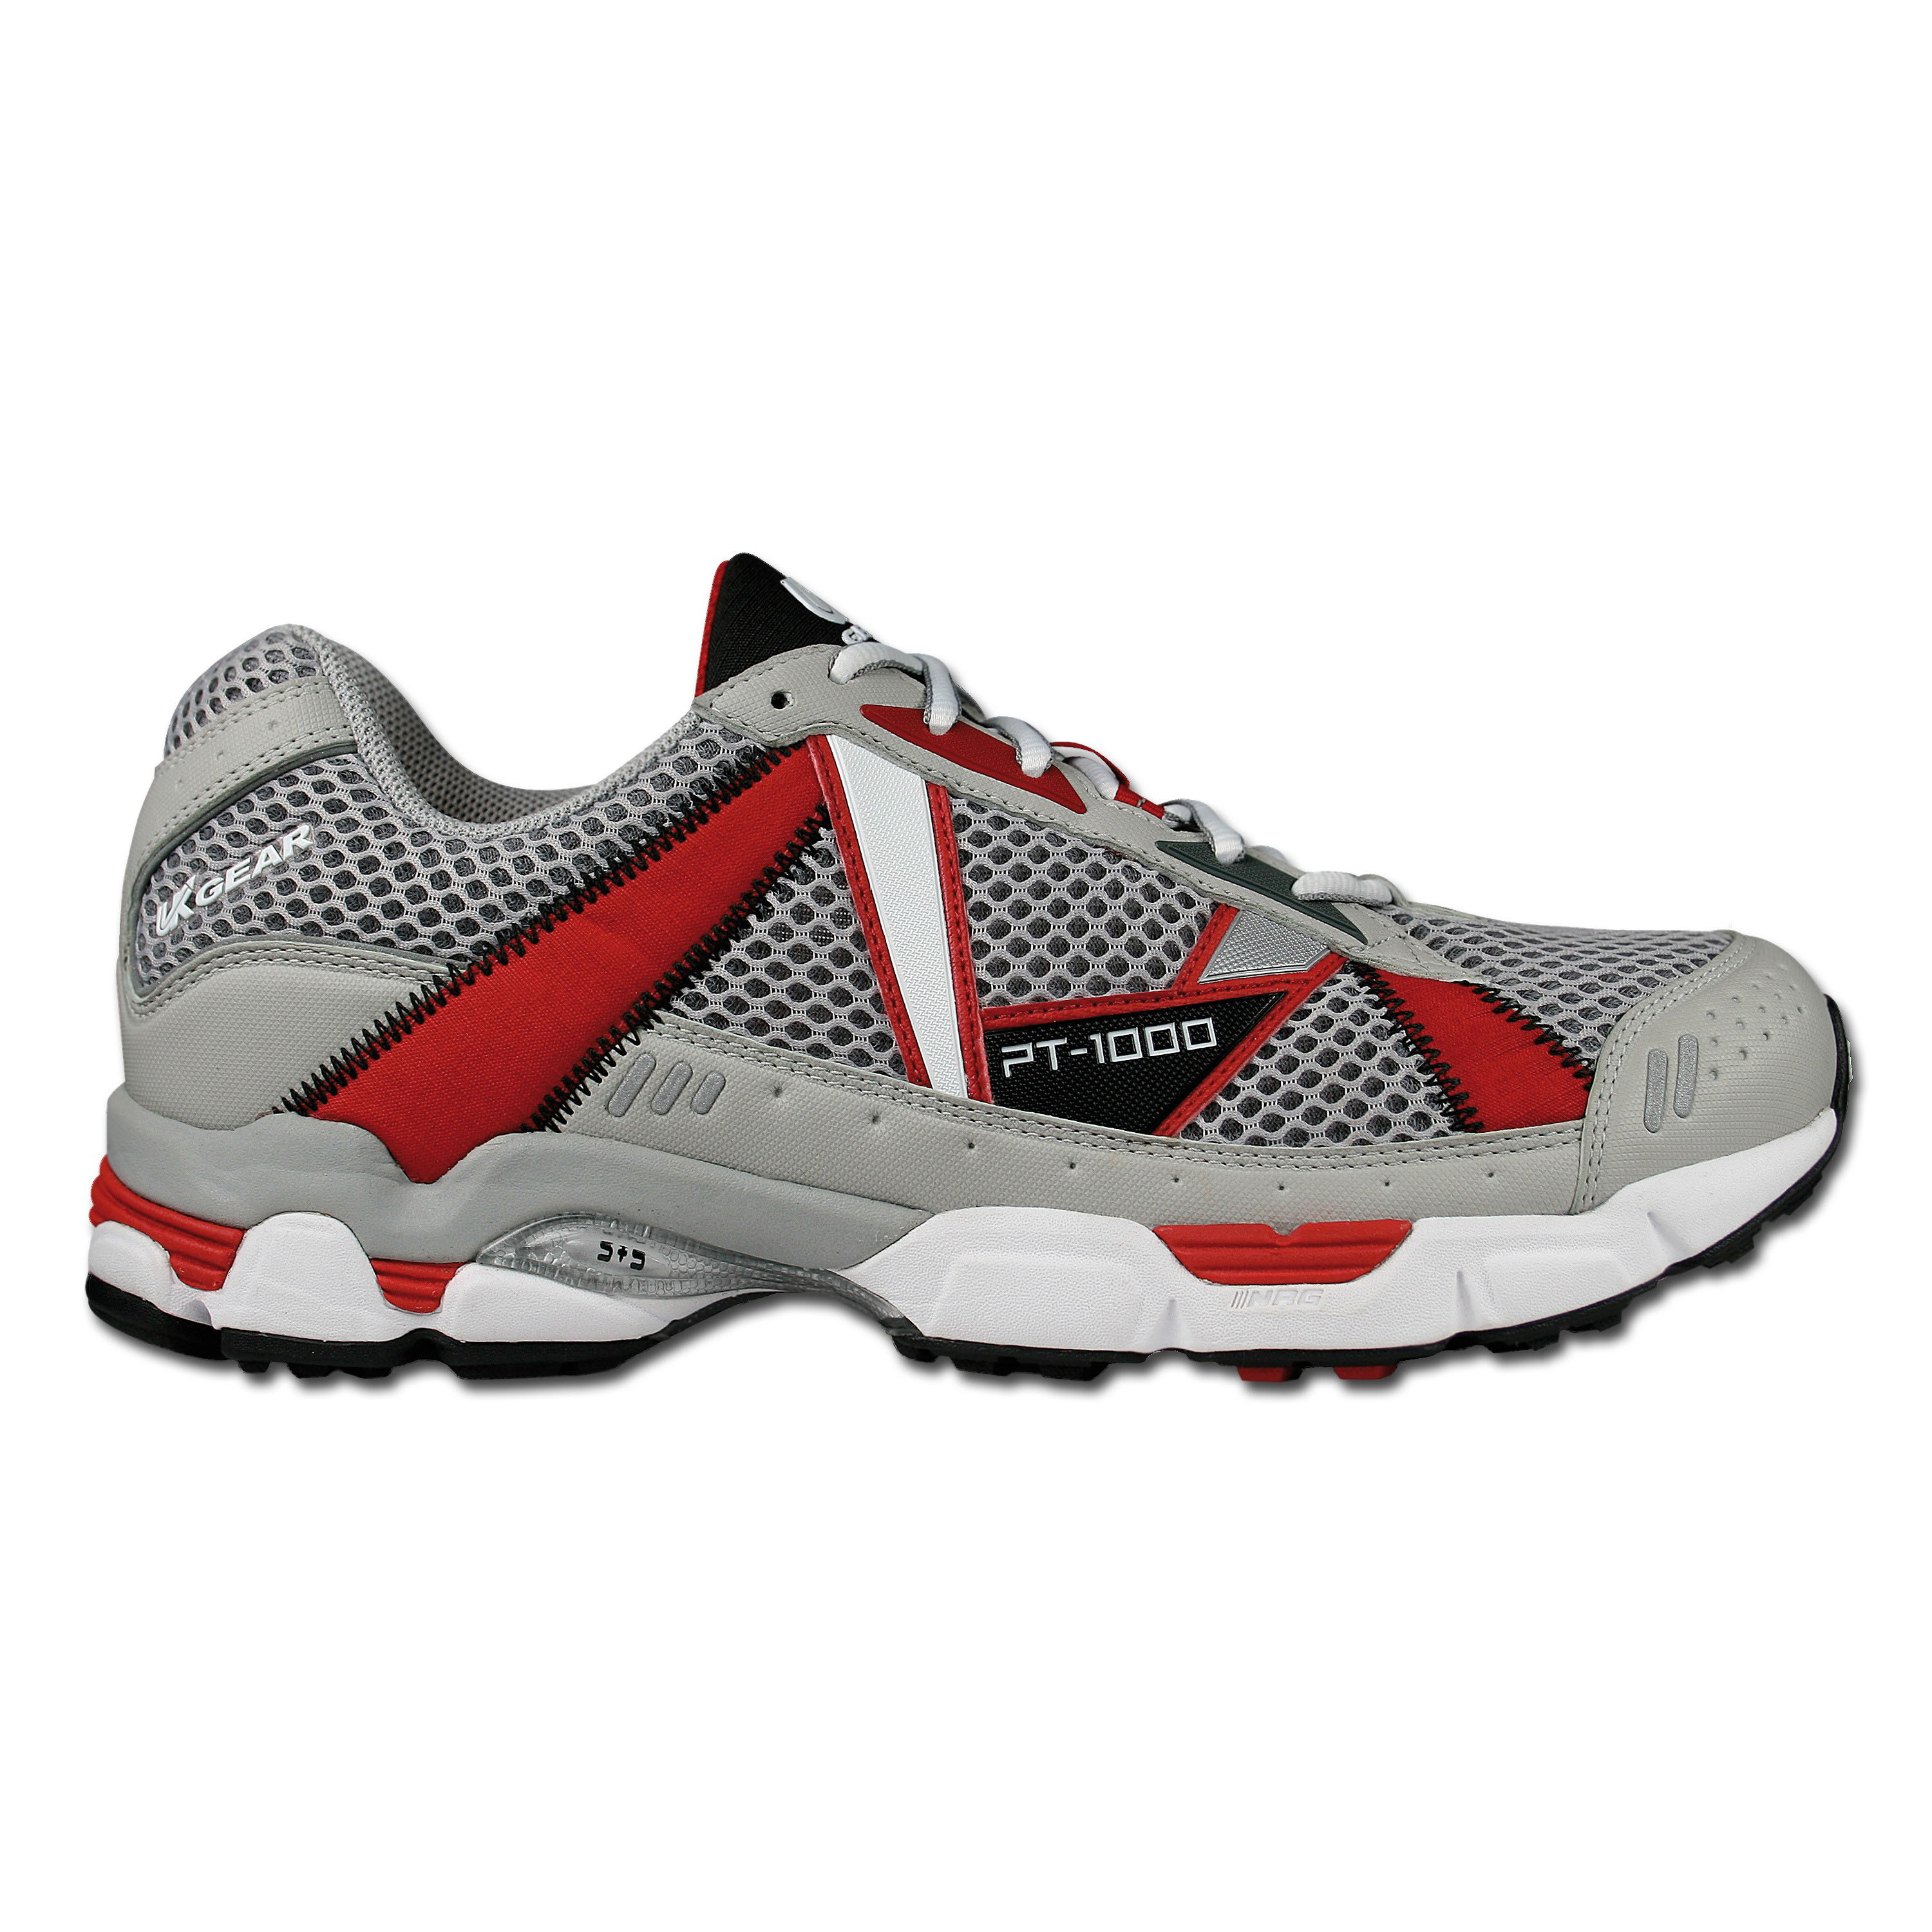 UK Gear PT-1000 NC Trail Running Shoes